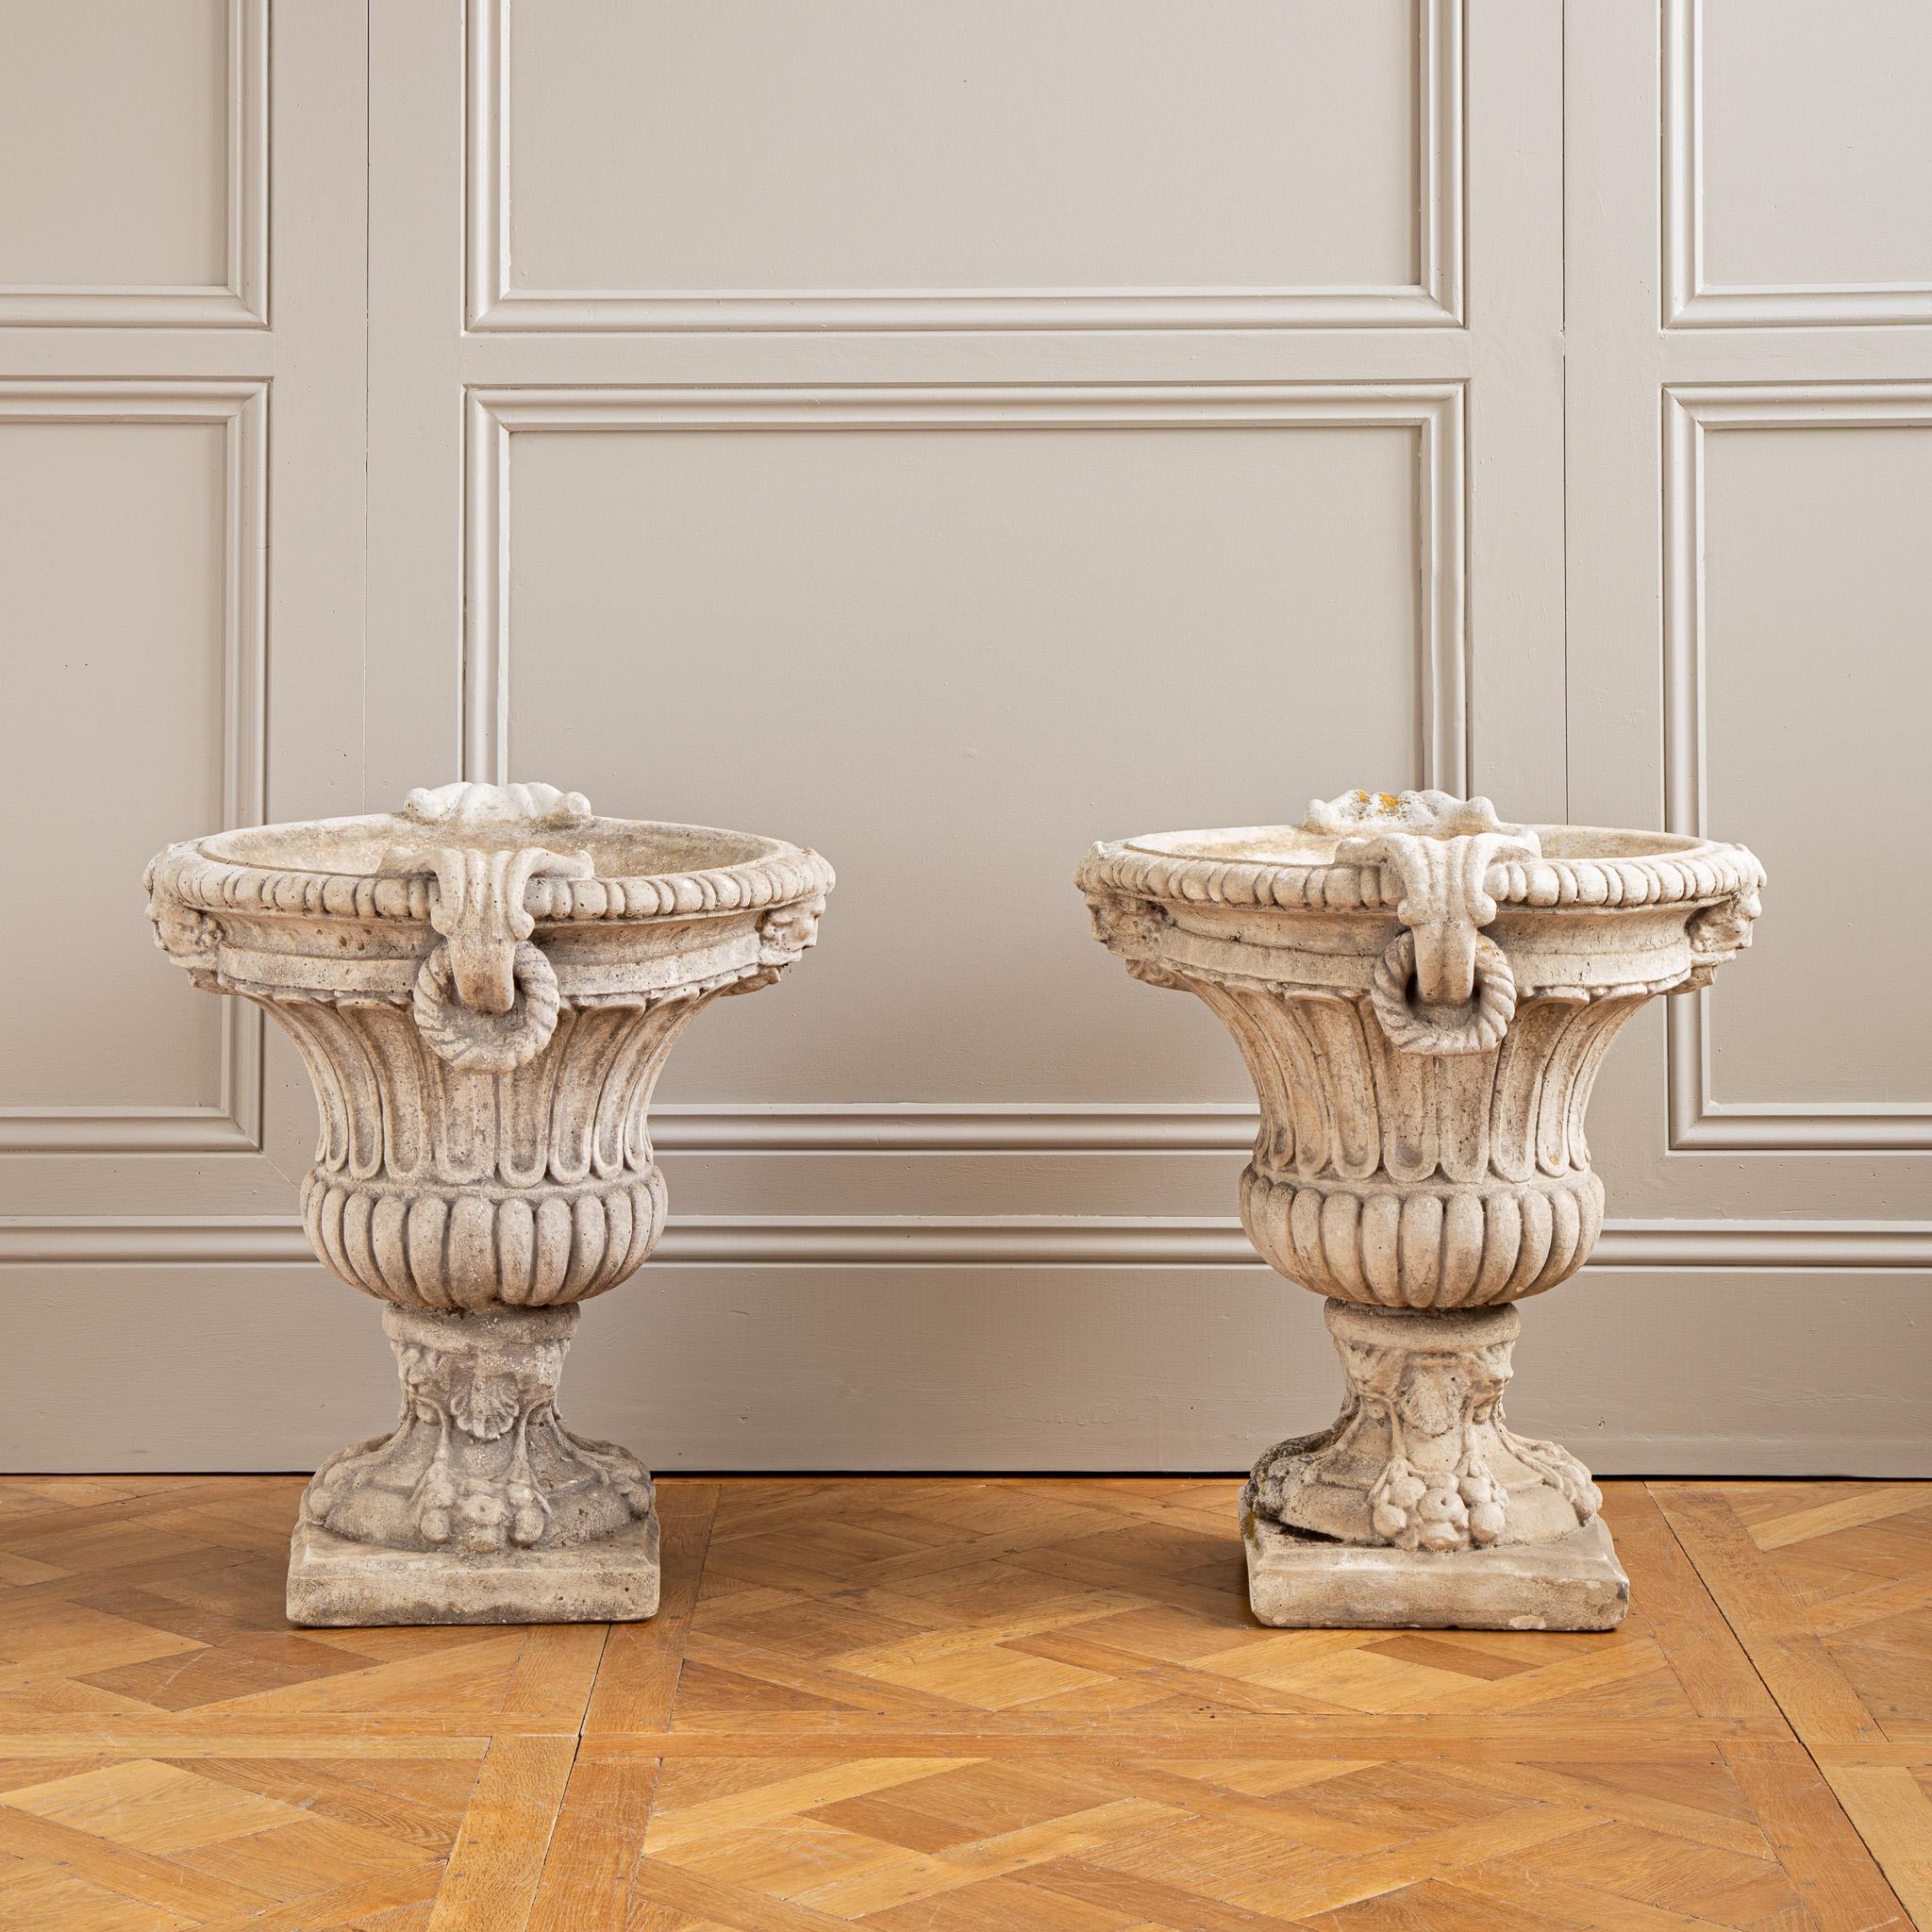 Cast Stone Circa Mid 1900's Set Of 4 Decorative Italian Garden Urns In Reconstituted Stone For Sale